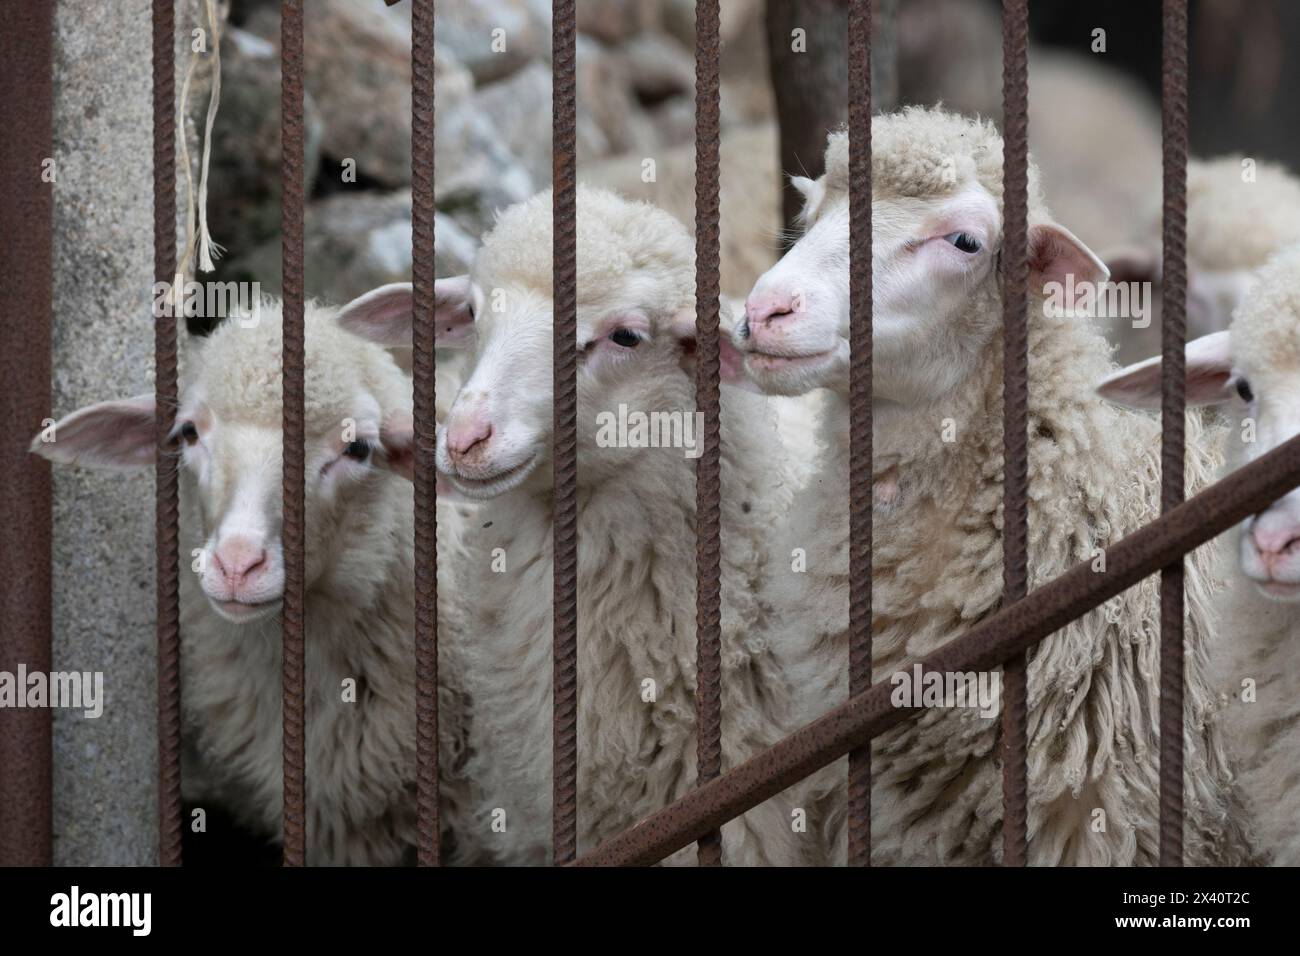 Portrait of three white sheep (Ovis aries) standing along a fence looking out; Tempio Pausania, Sassari, Italy Stock Photo